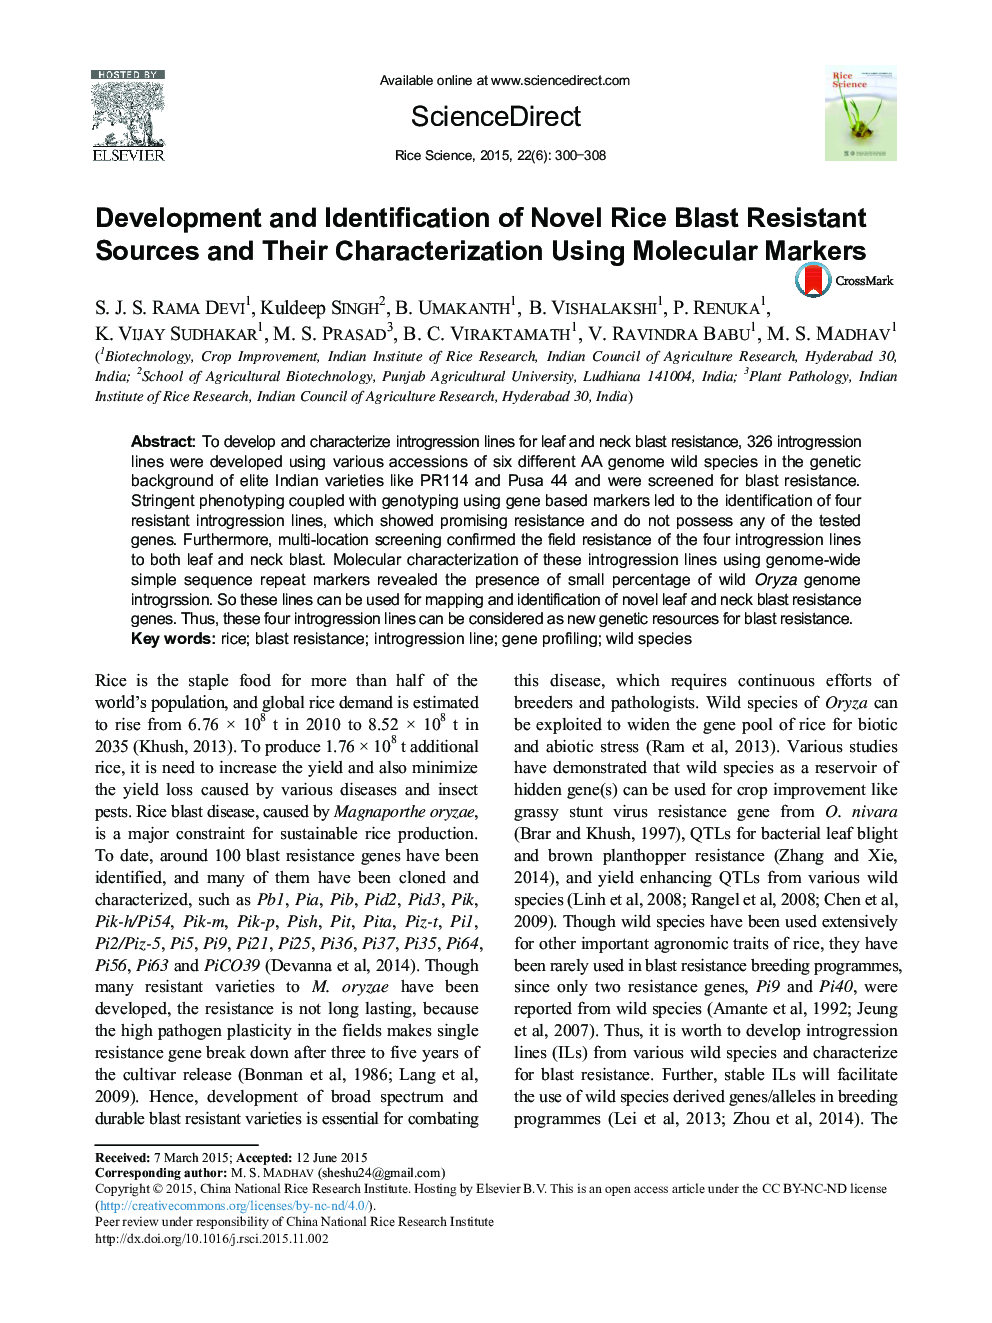 Development and Identification of Novel Rice Blast Resistant Sources and Their Characterization Using Molecular Markers 